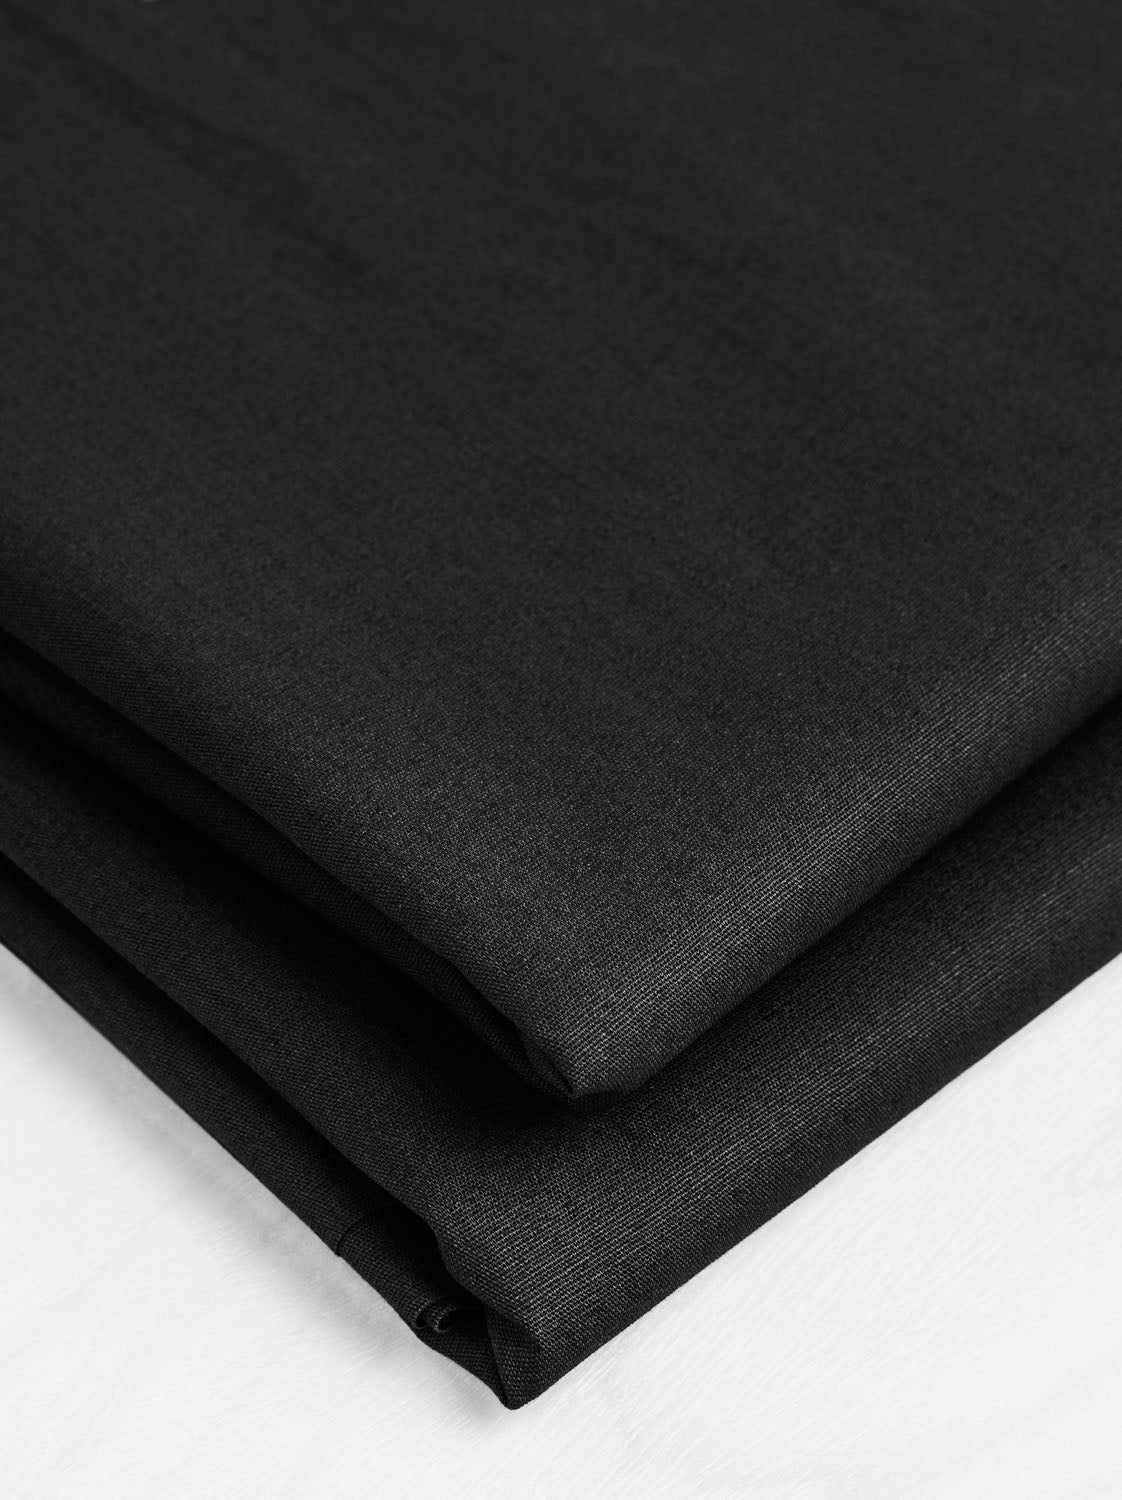 Black Iron-On Mending Fabric By Loops & Threads™